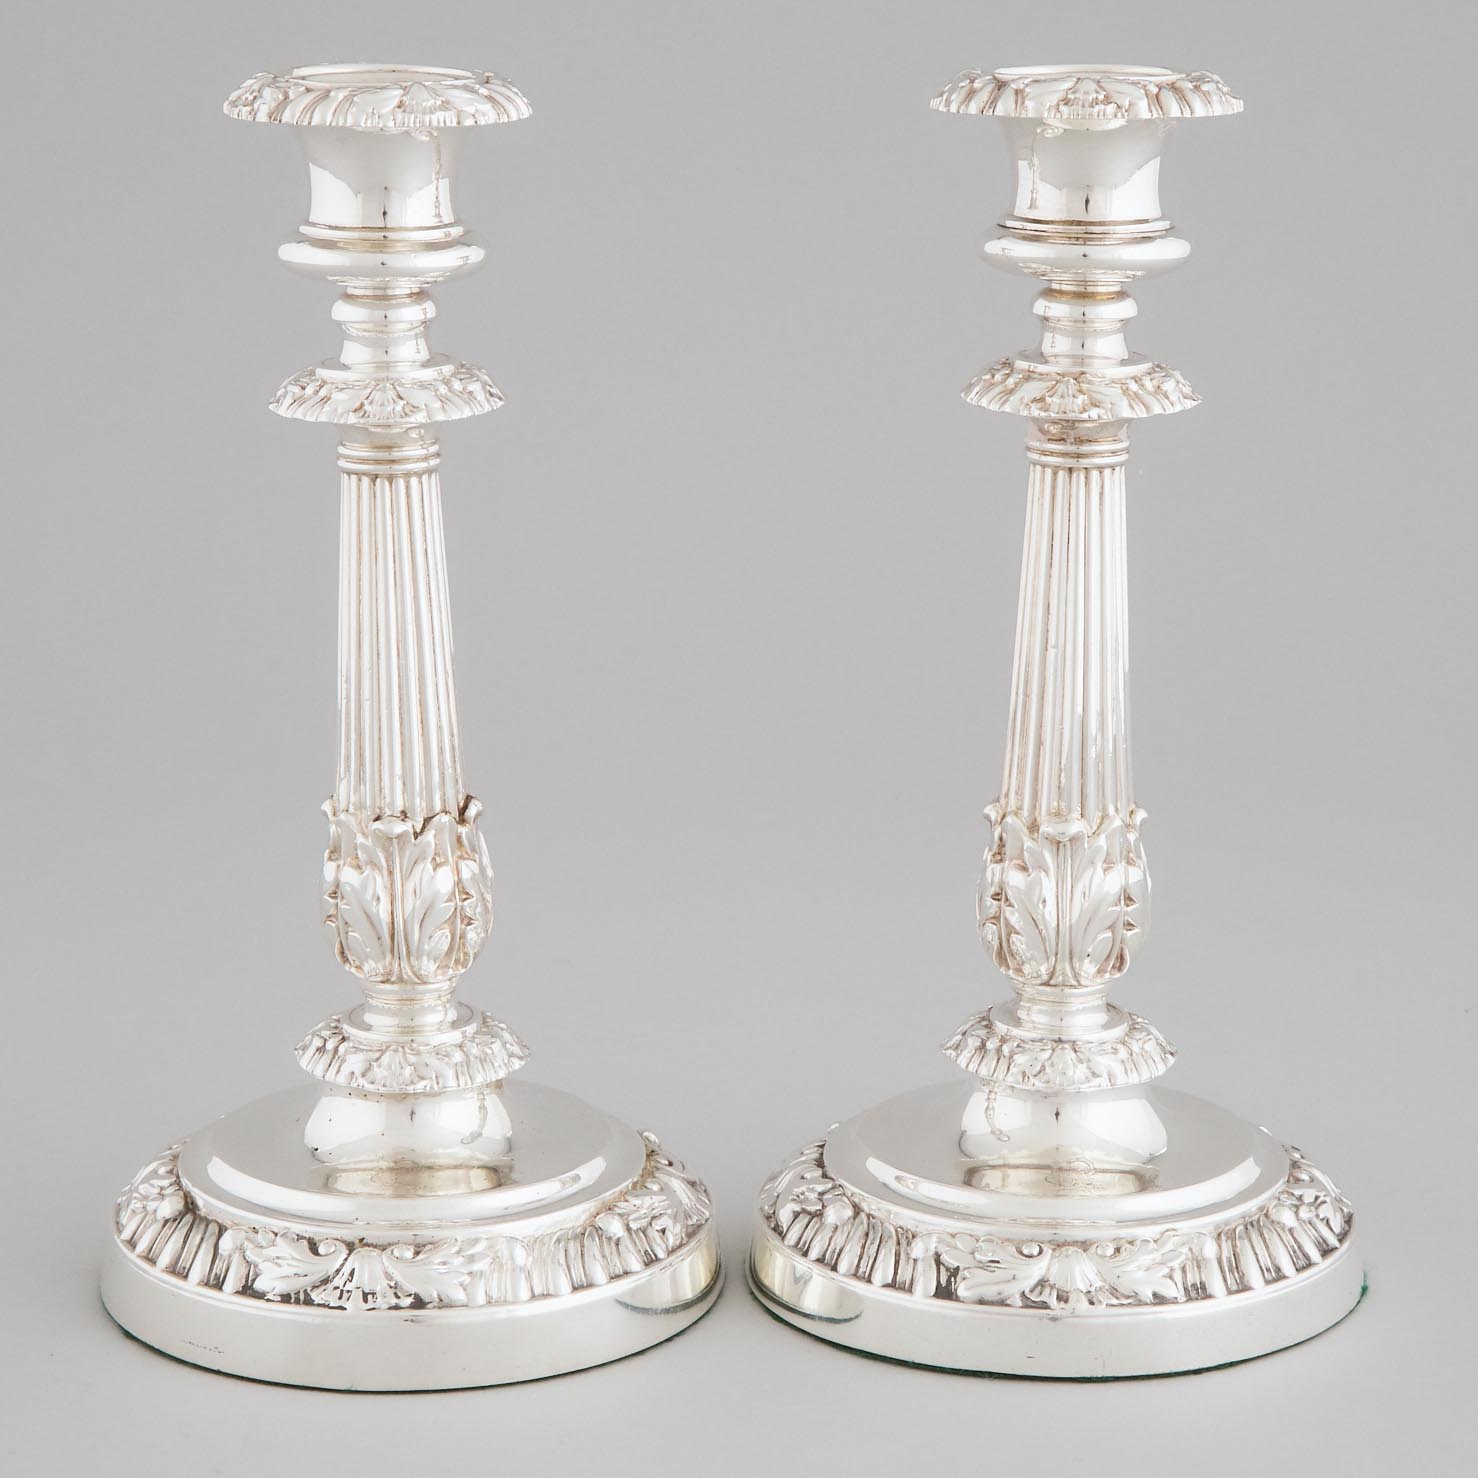 Pair of George IV Silver Table